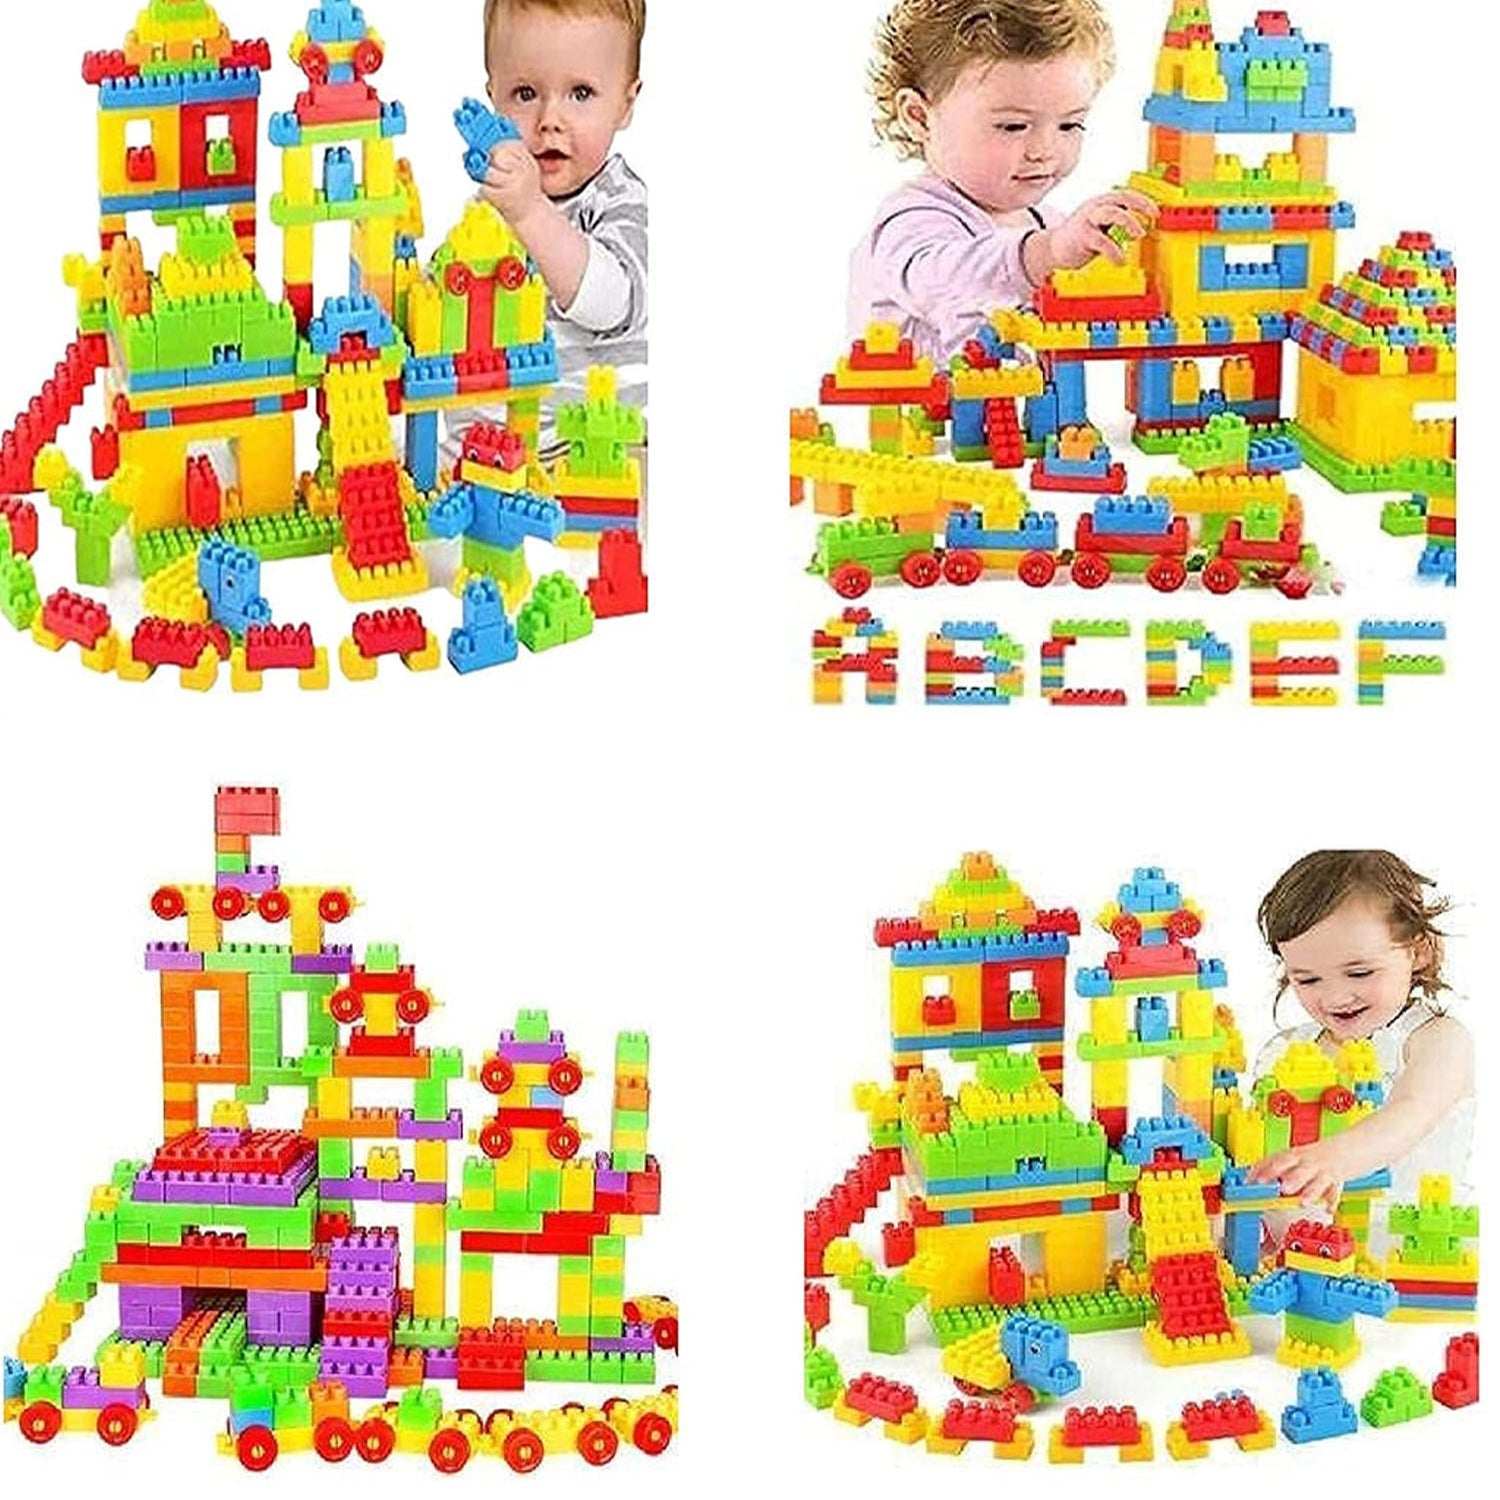 3915 200 Pc Train Blocks Toy used in all kinds of household and official places specially for kids and children for their playing and enjoying purposes. 